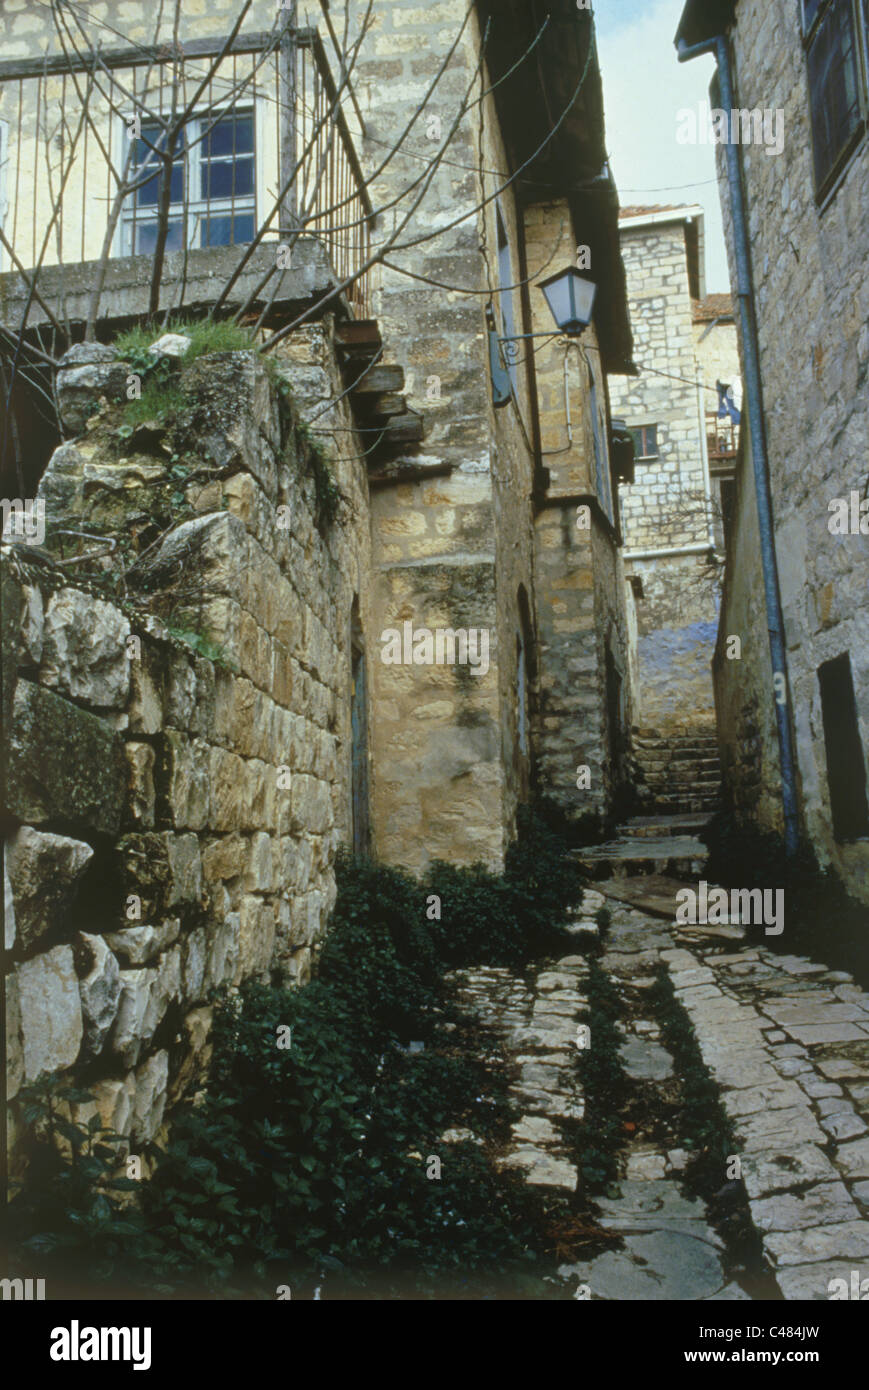 Photograph of one of the streets of the old city of Safed Stock Photo